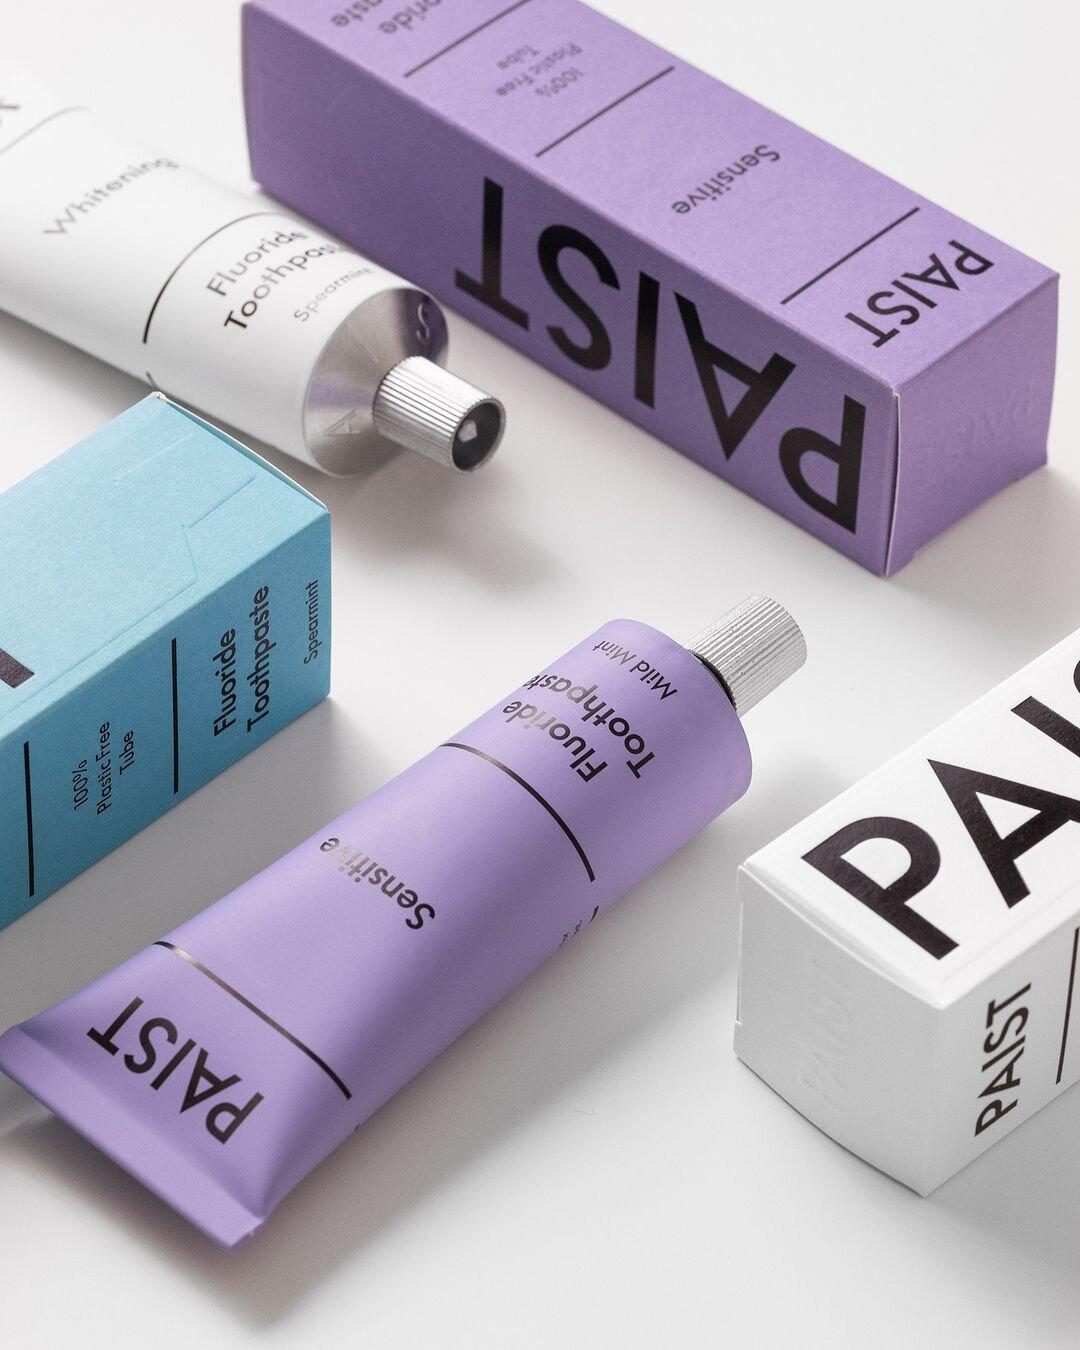 Shop Plastic-Free Fluoride Toothpaste from PAIST on Veo